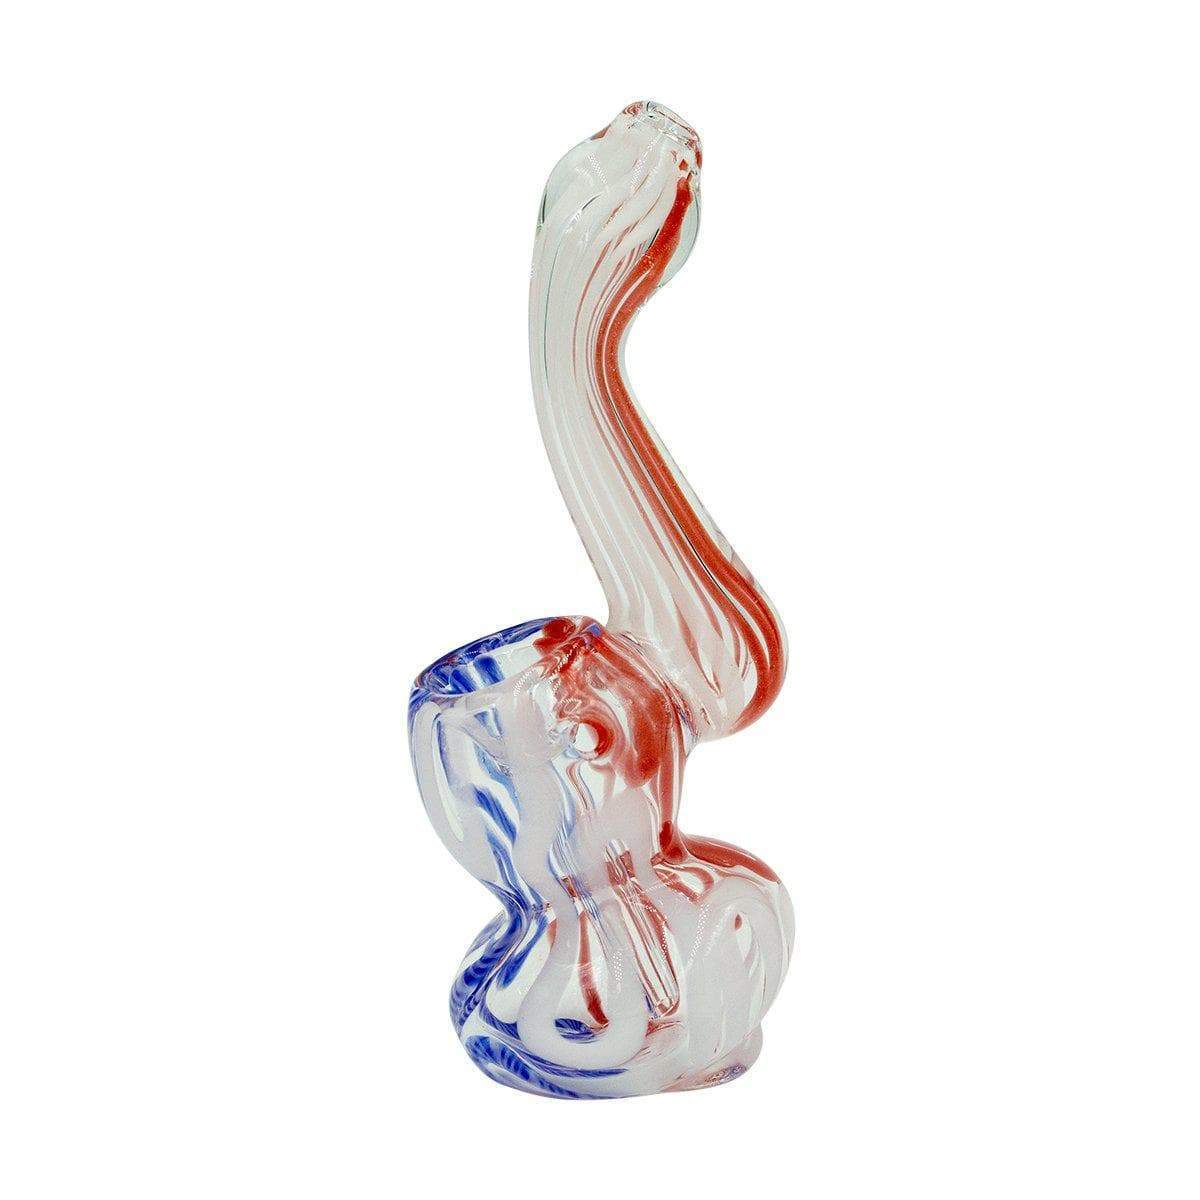 4-inch mini glass bubbler smoking device with twisting design genie-in-a-bottle shape in fun clean swirling colors